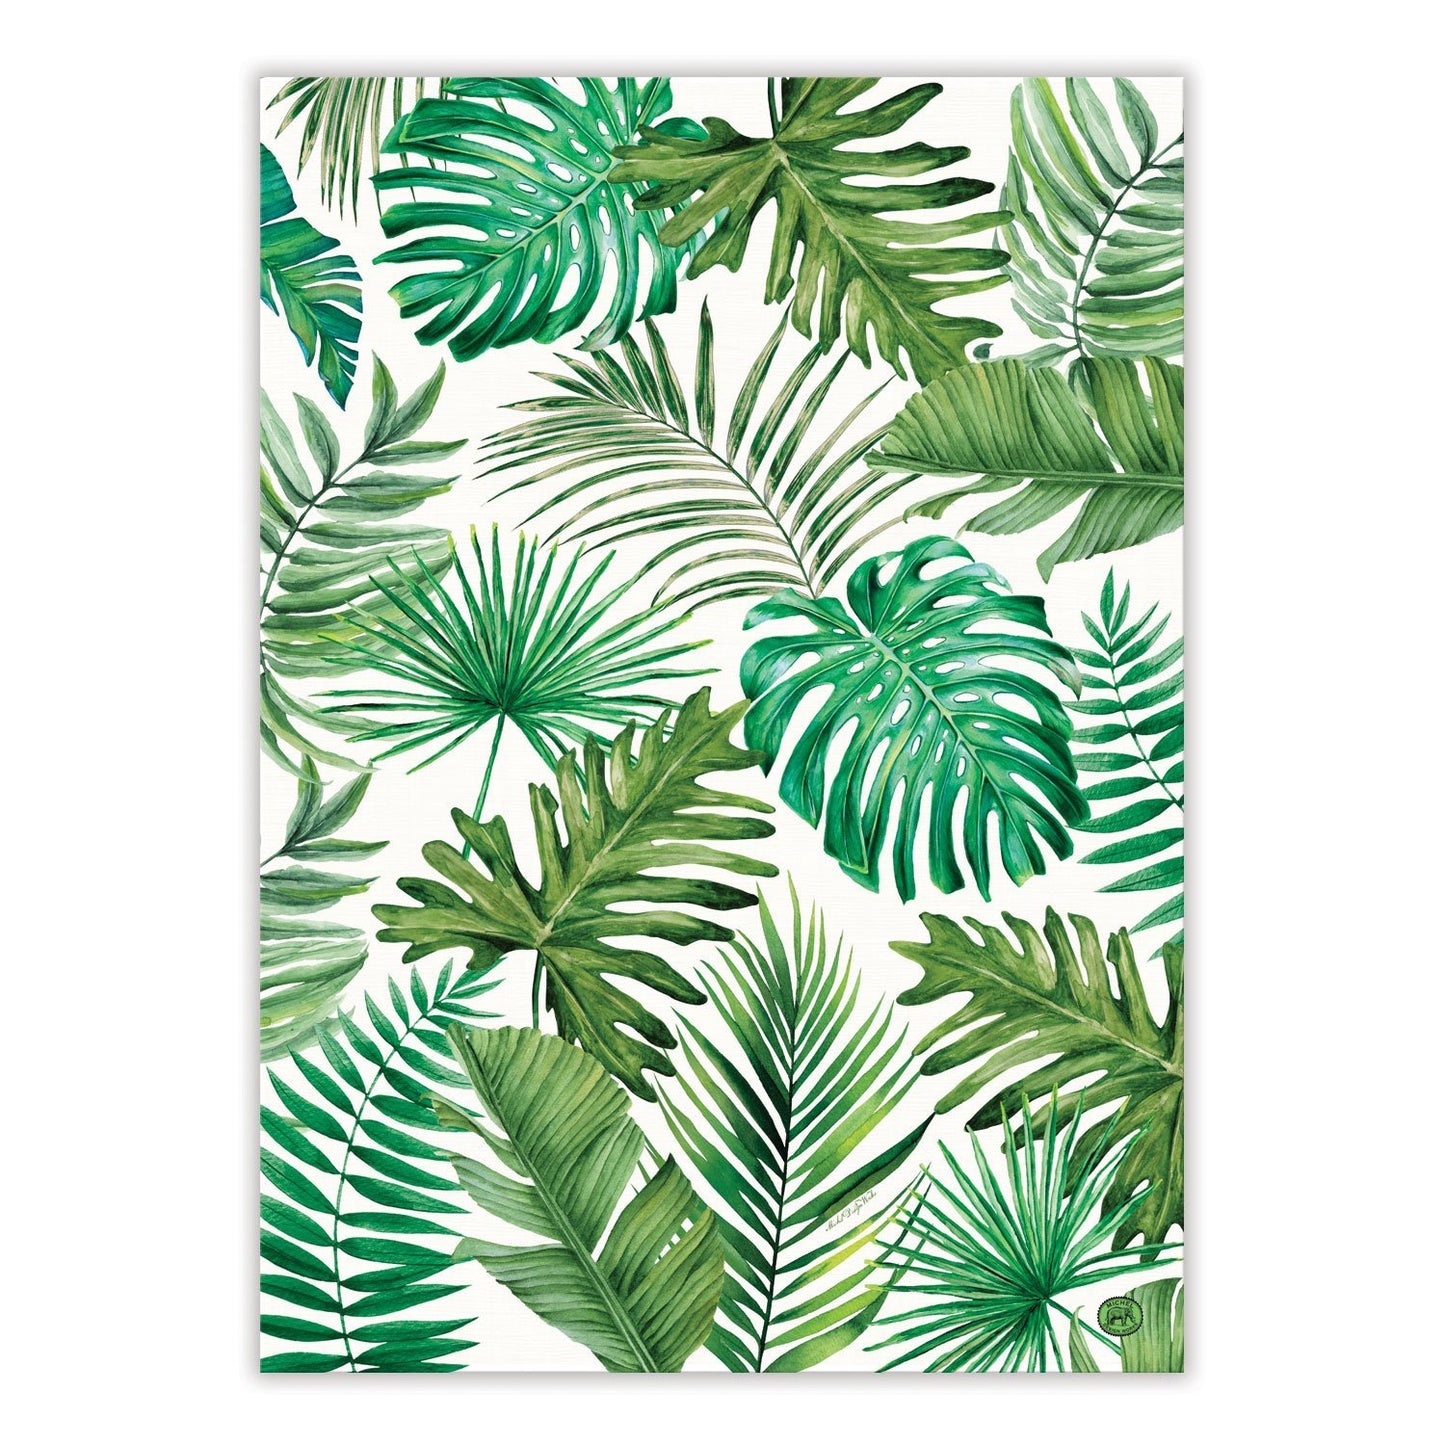 Tranquil Splendor of a Tropical Oasis with Our Palm Breeze Kitchen Towel